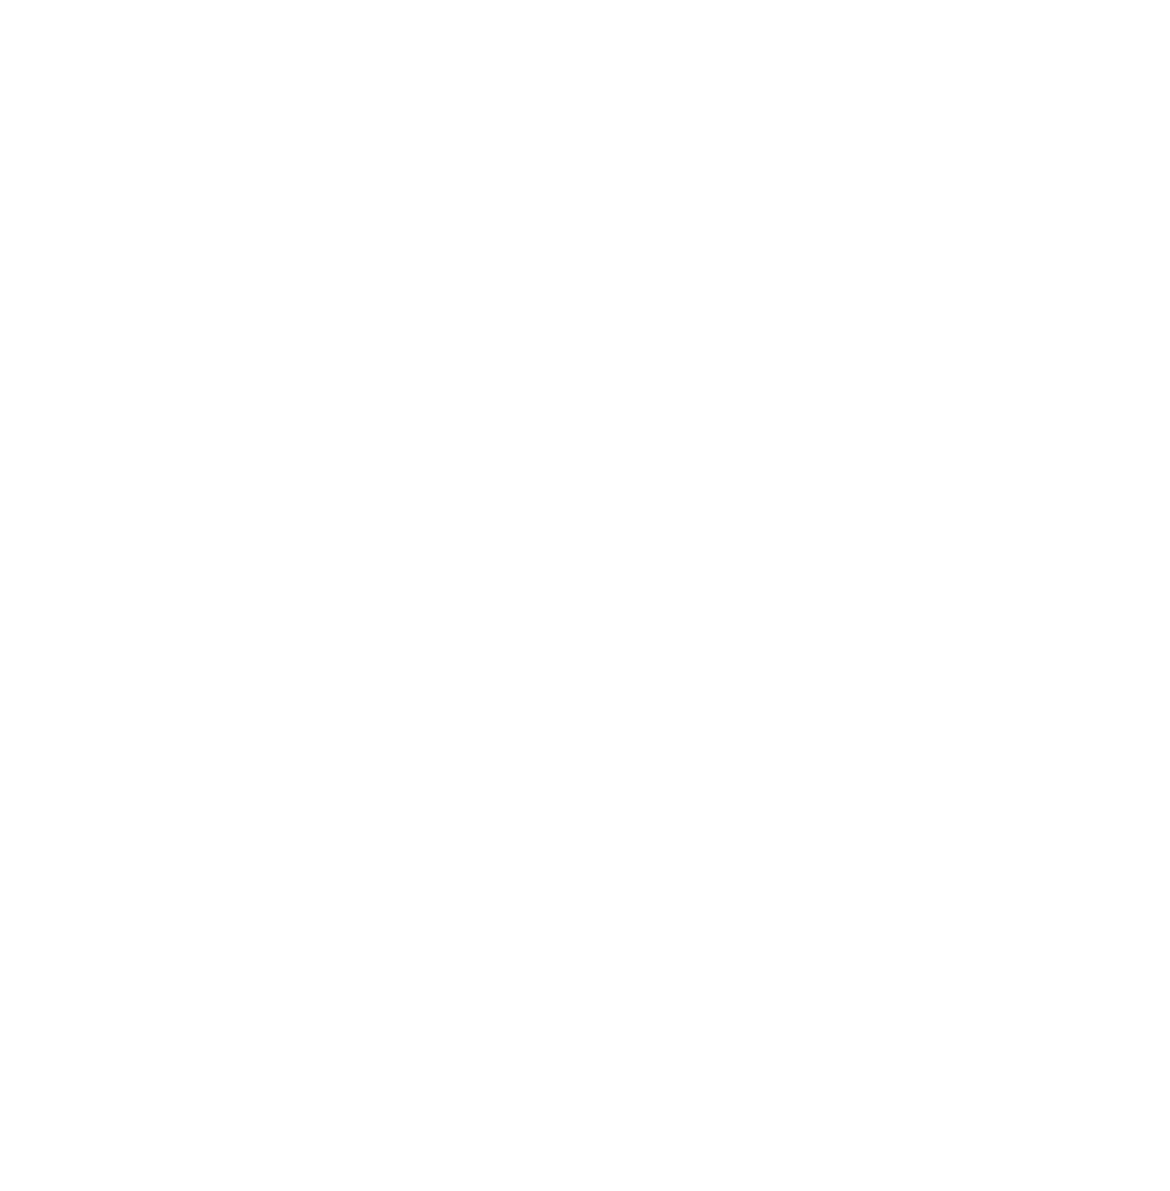 iso 22301 certificate